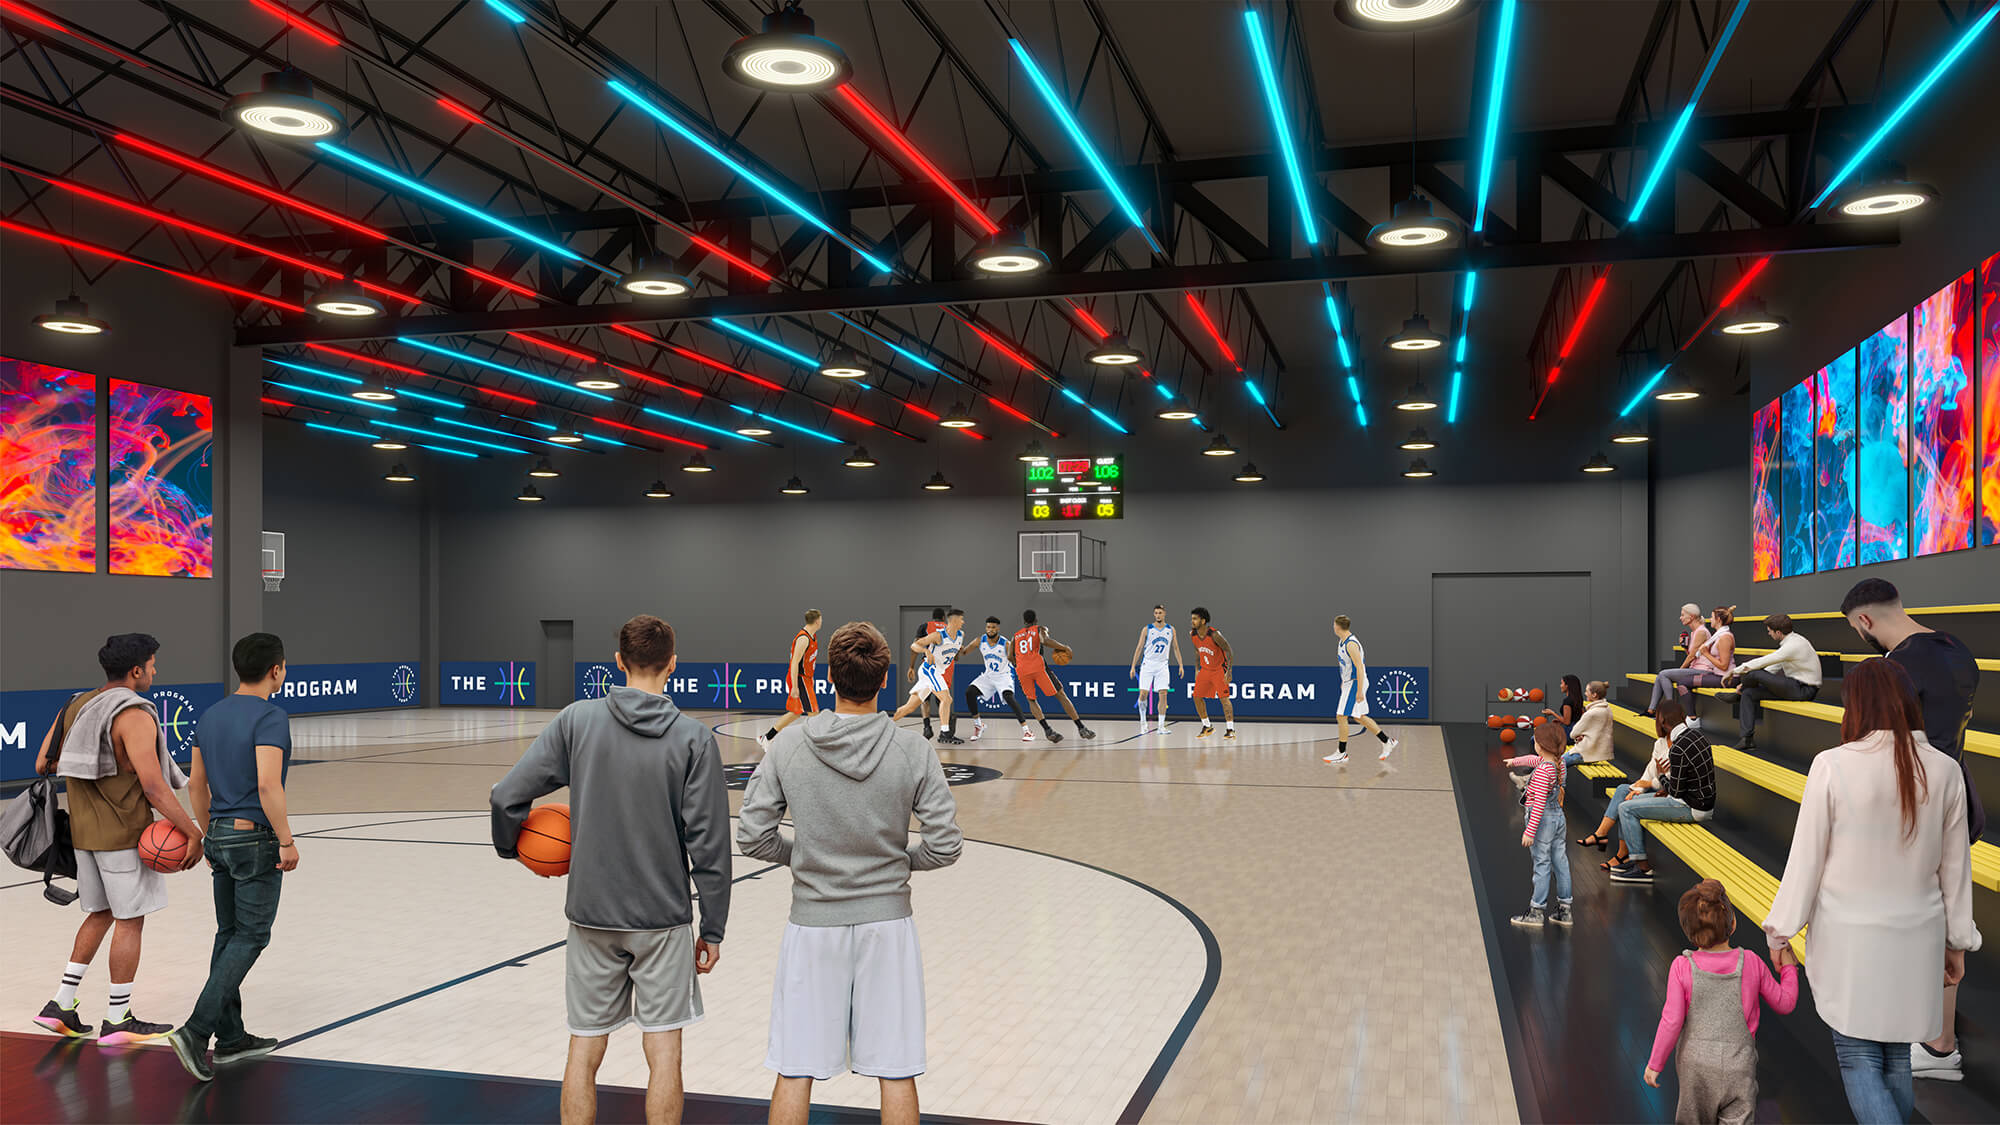 Rendering of one of the basketball courts at The Program youth basketball facility in Brooklyn NYC